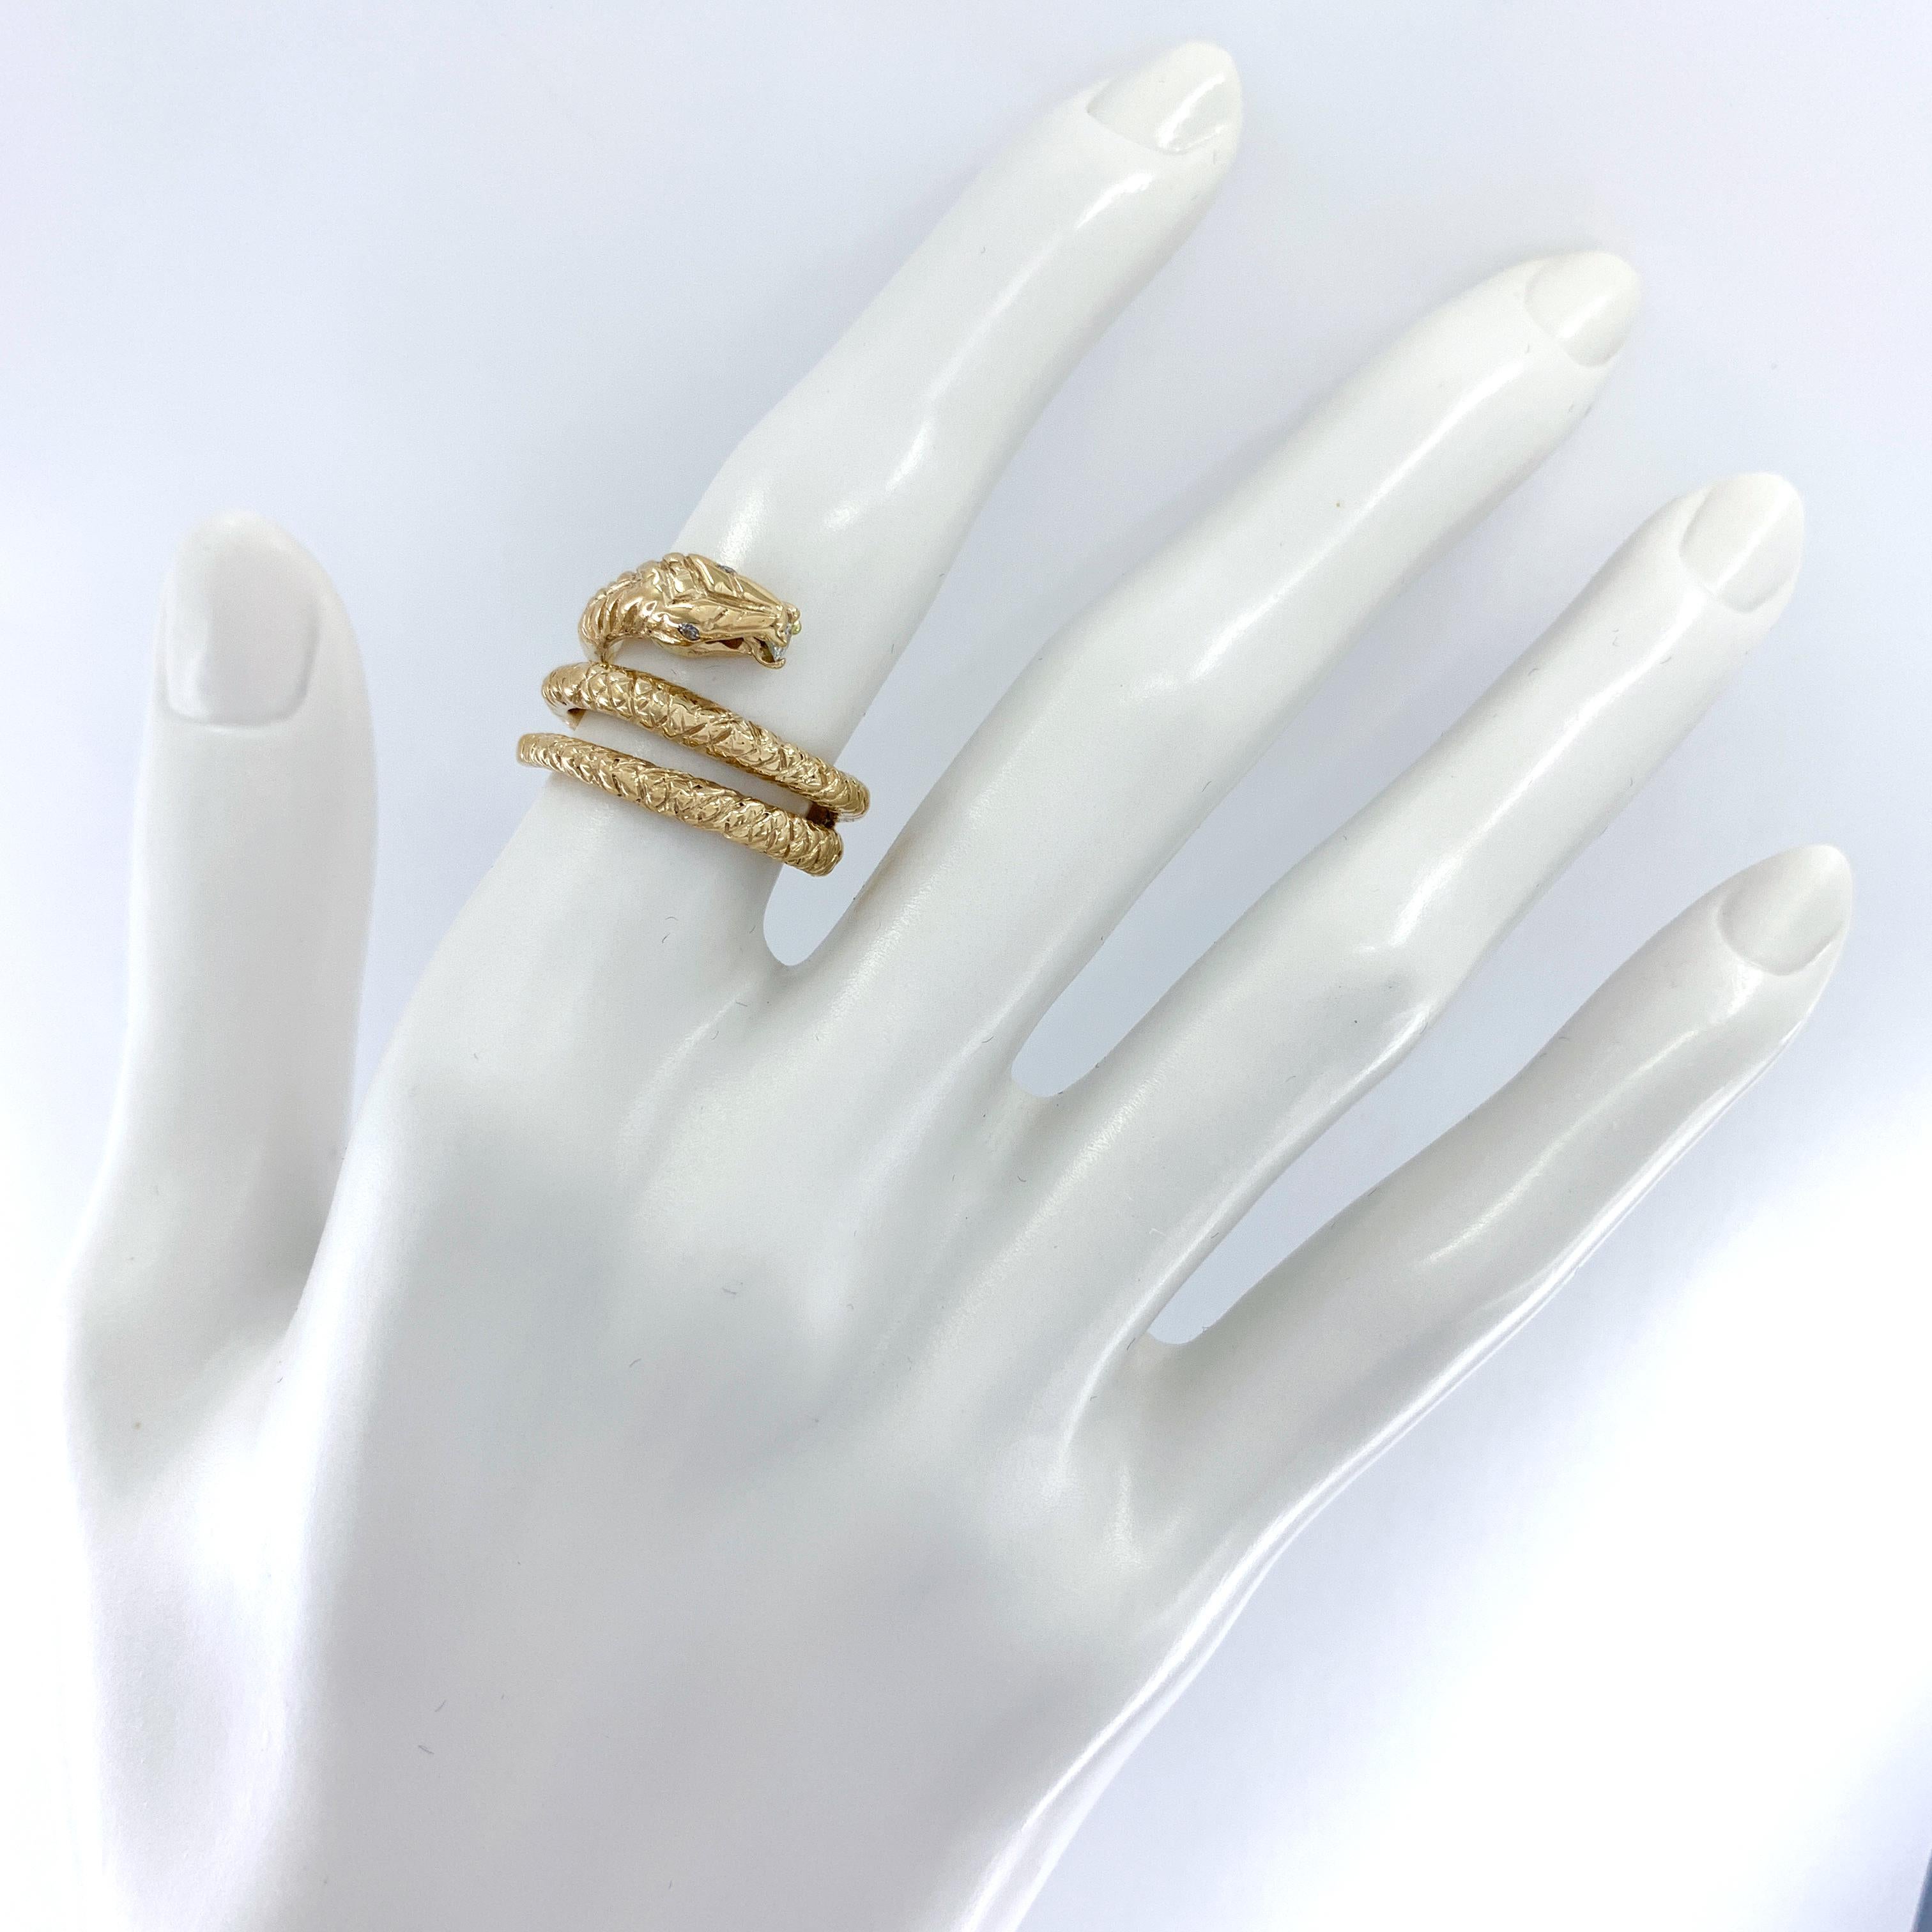 Our Mr. Snake was cast by Eytan Brandes using a mold made from a Victorian-era ring.  The original ring was 9k and had ruby eyes.  

Eytan's updated version is 18 karat gold and features diamond eyes plus a bright white diamond for Mr. Snake to